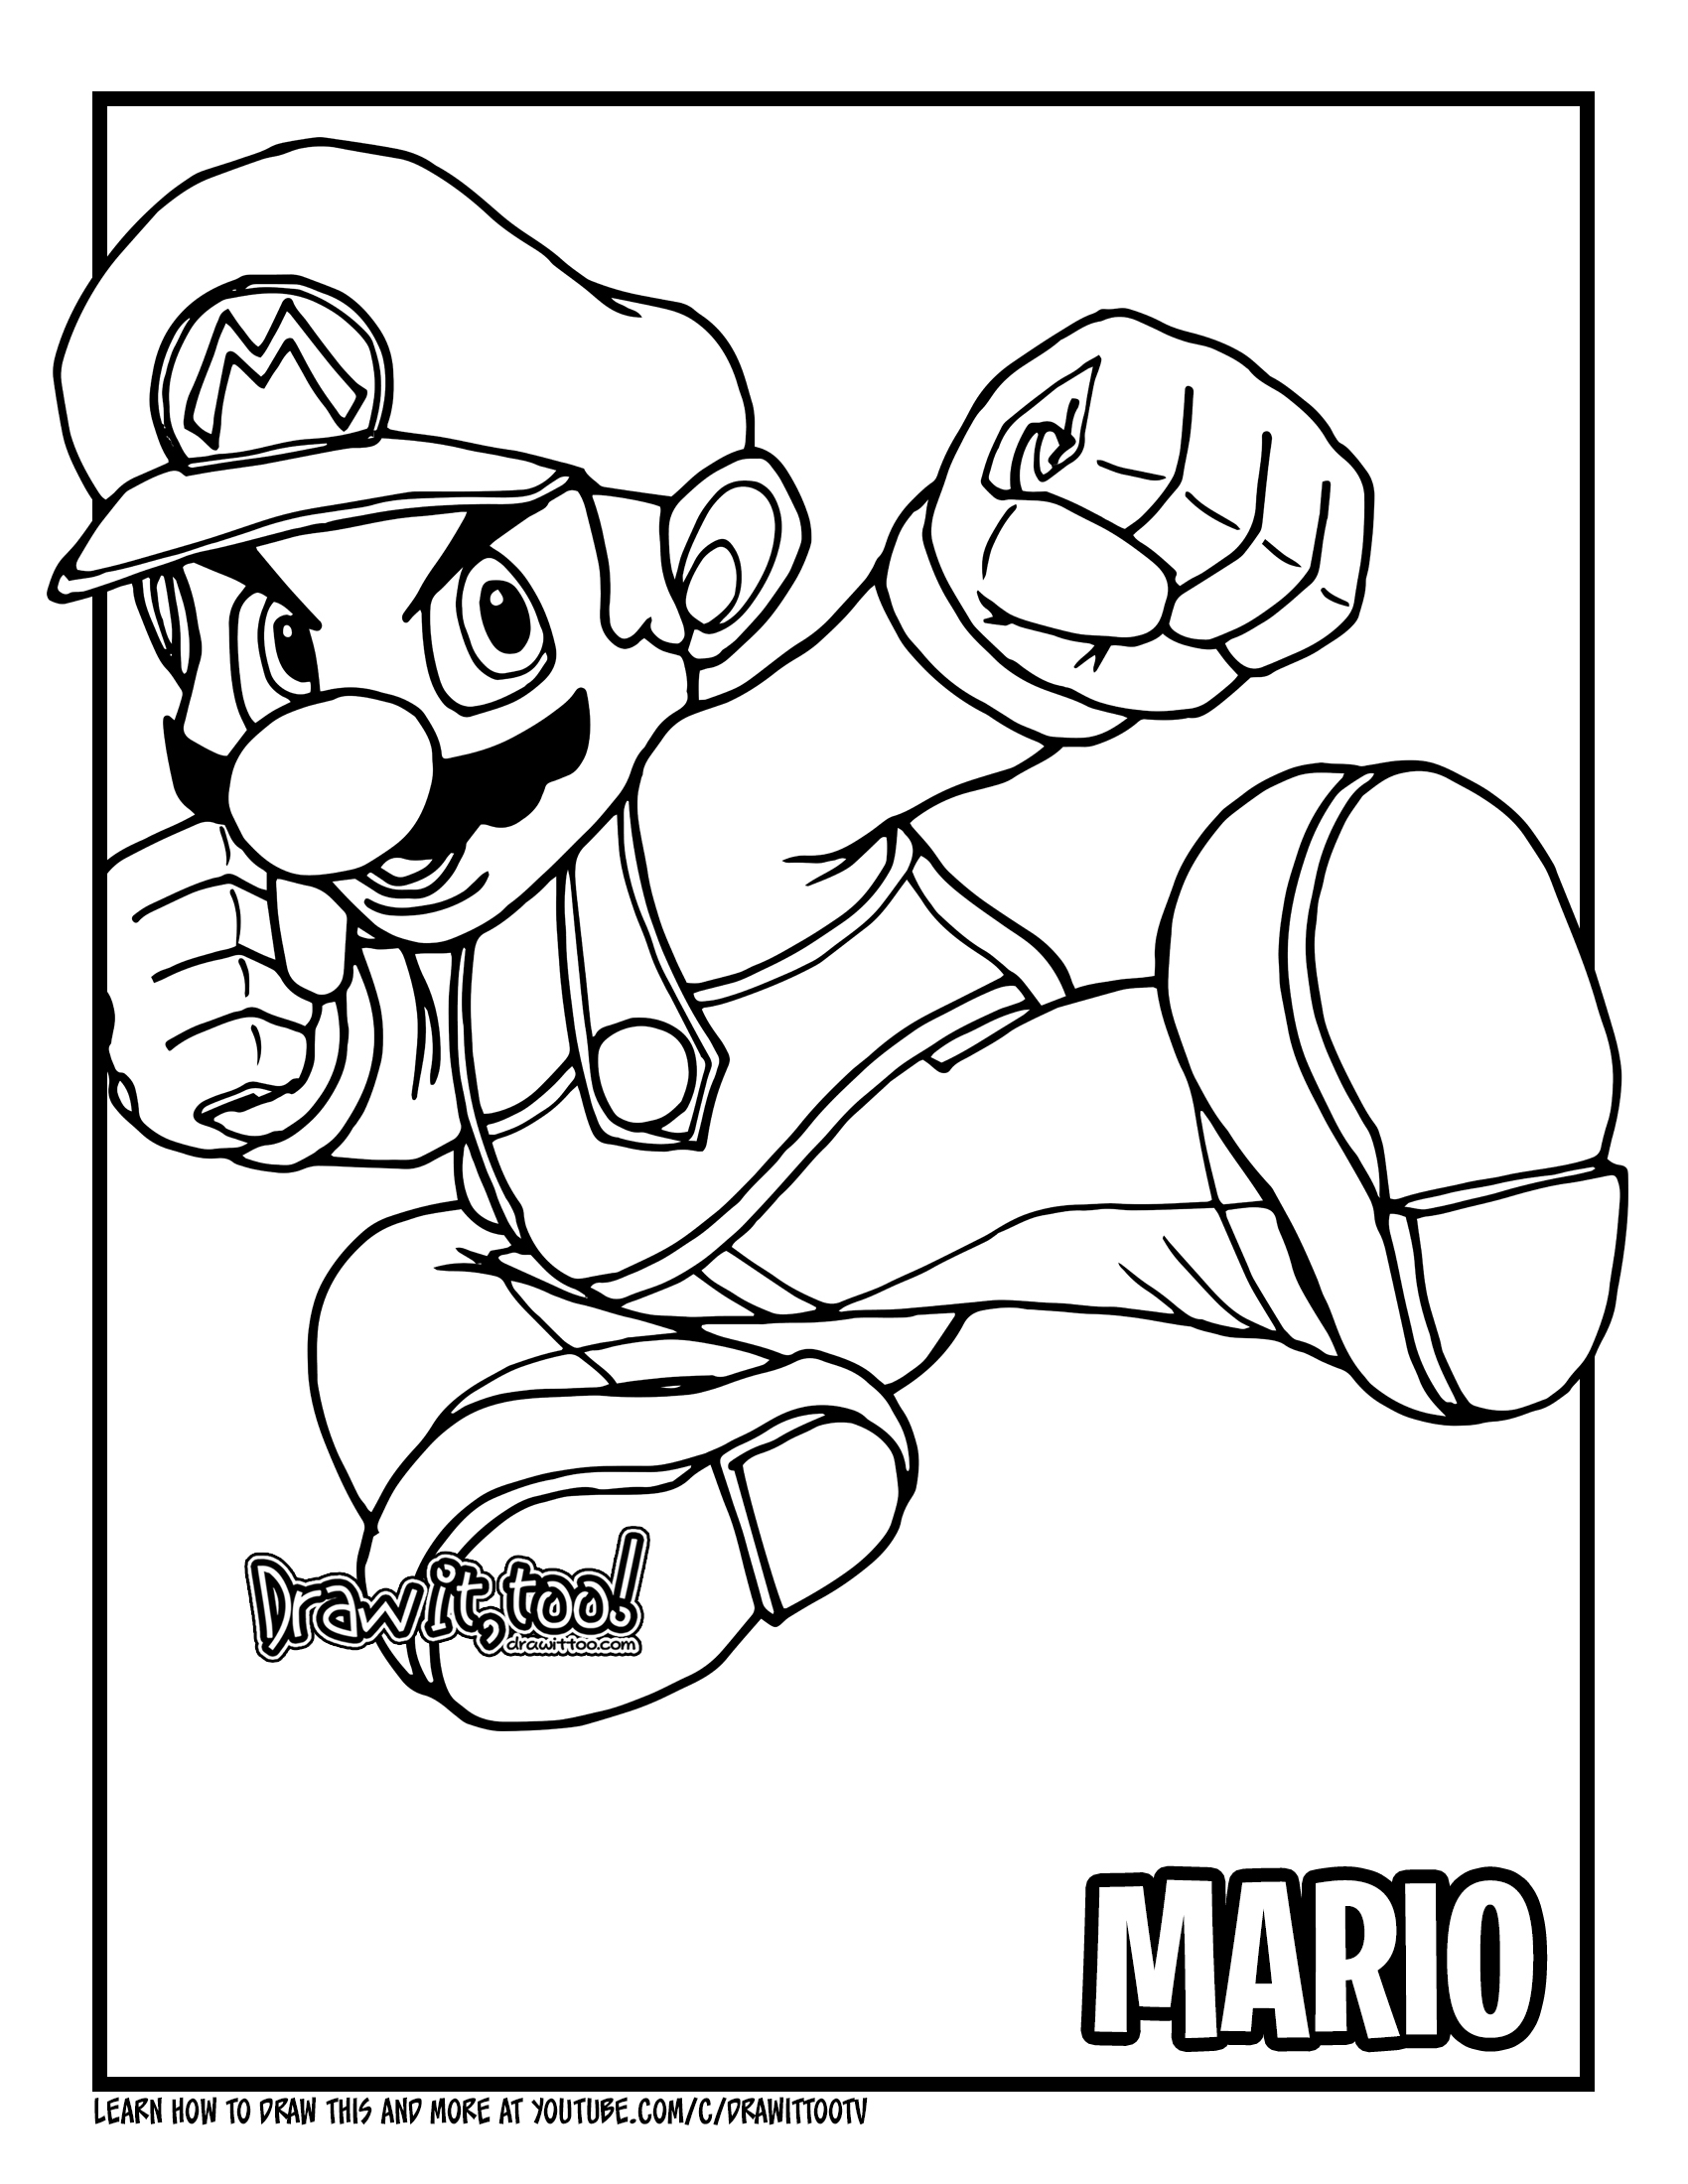 How to Draw MARIO (Super Mario Bros.) Drawing Tutorial | Draw it, Too!